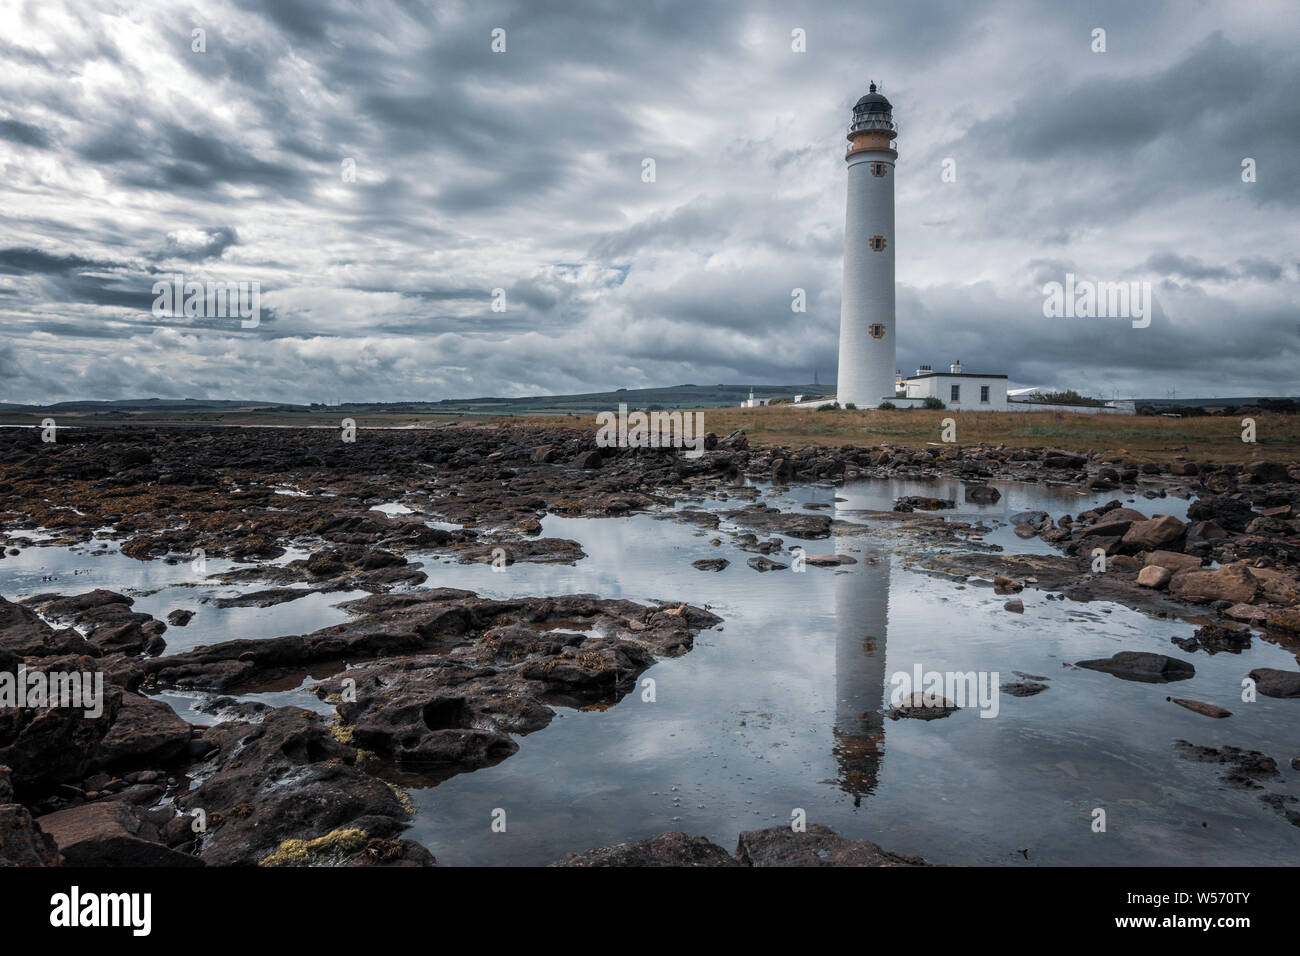 UK Landscapes: Creative image of Barns Ness Lighthouse reflected in a rock pool with dramatic sky,  East Lothian, Scotland Stock Photo